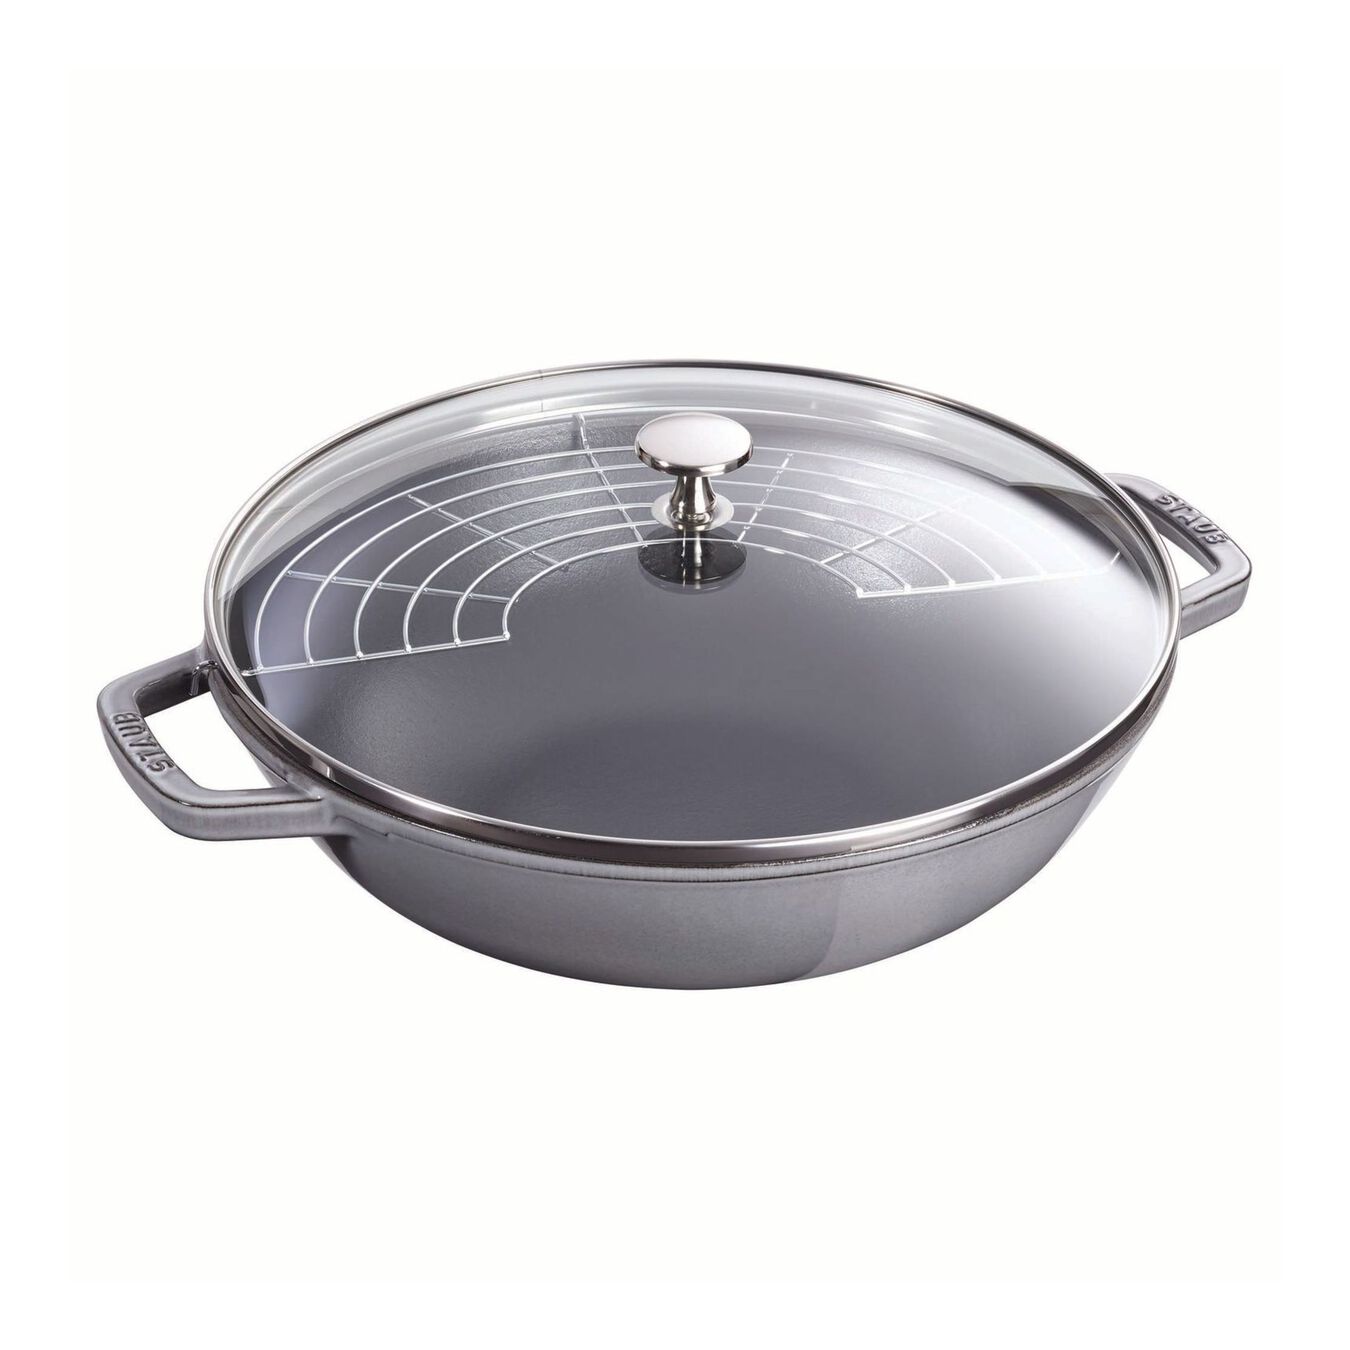 30 cm Cast iron Wok with glass lid graphite-grey,,large 1